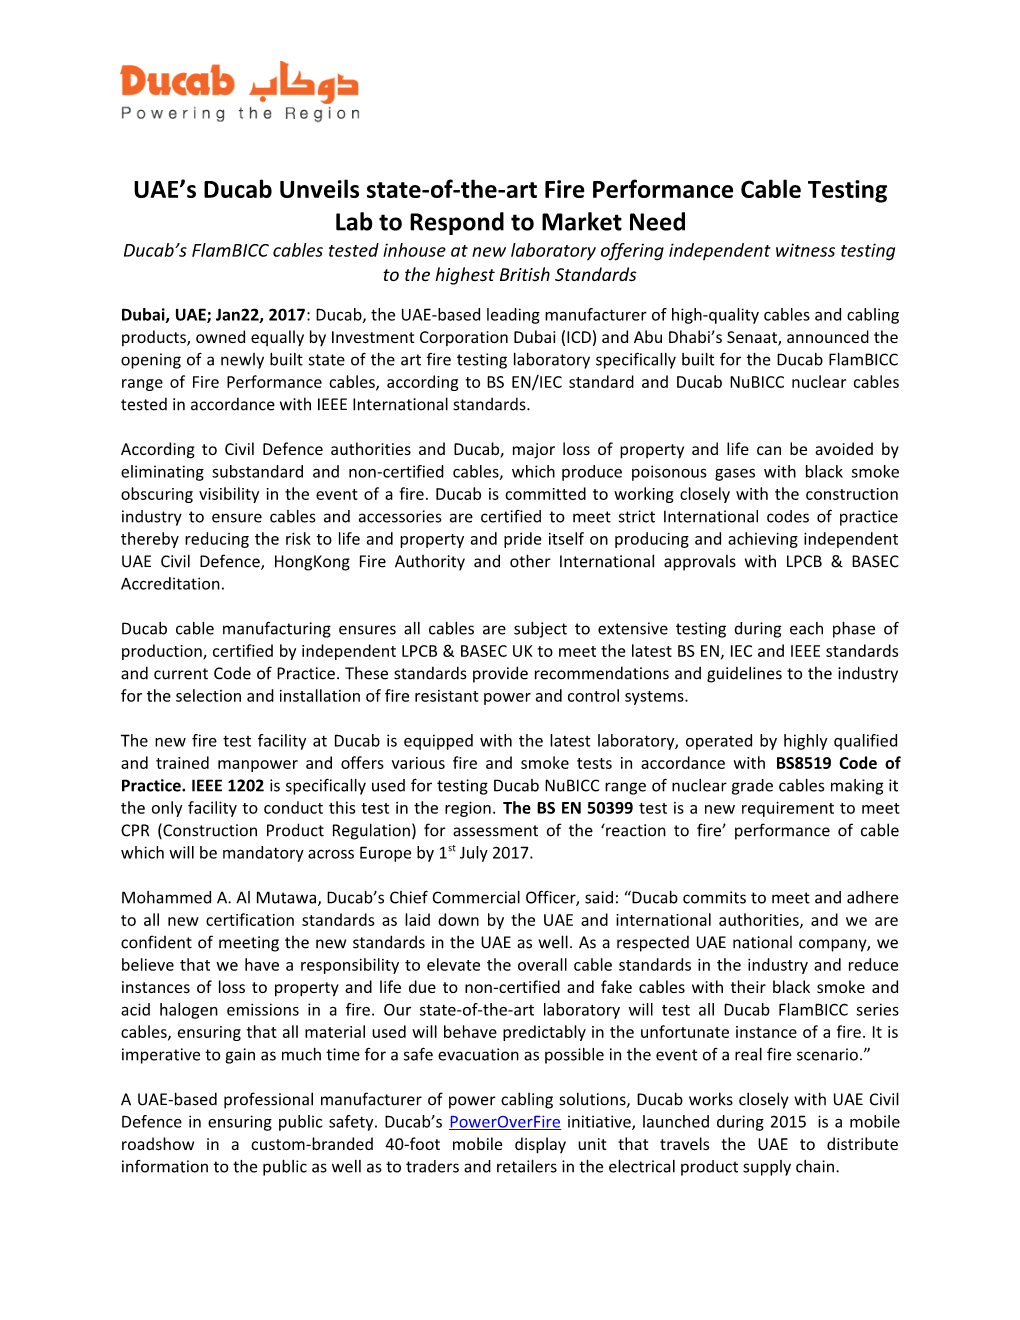 UAE S Ducab Unveils State-Of-The-Art Fire Performance Cable Testing Lab to Respond To